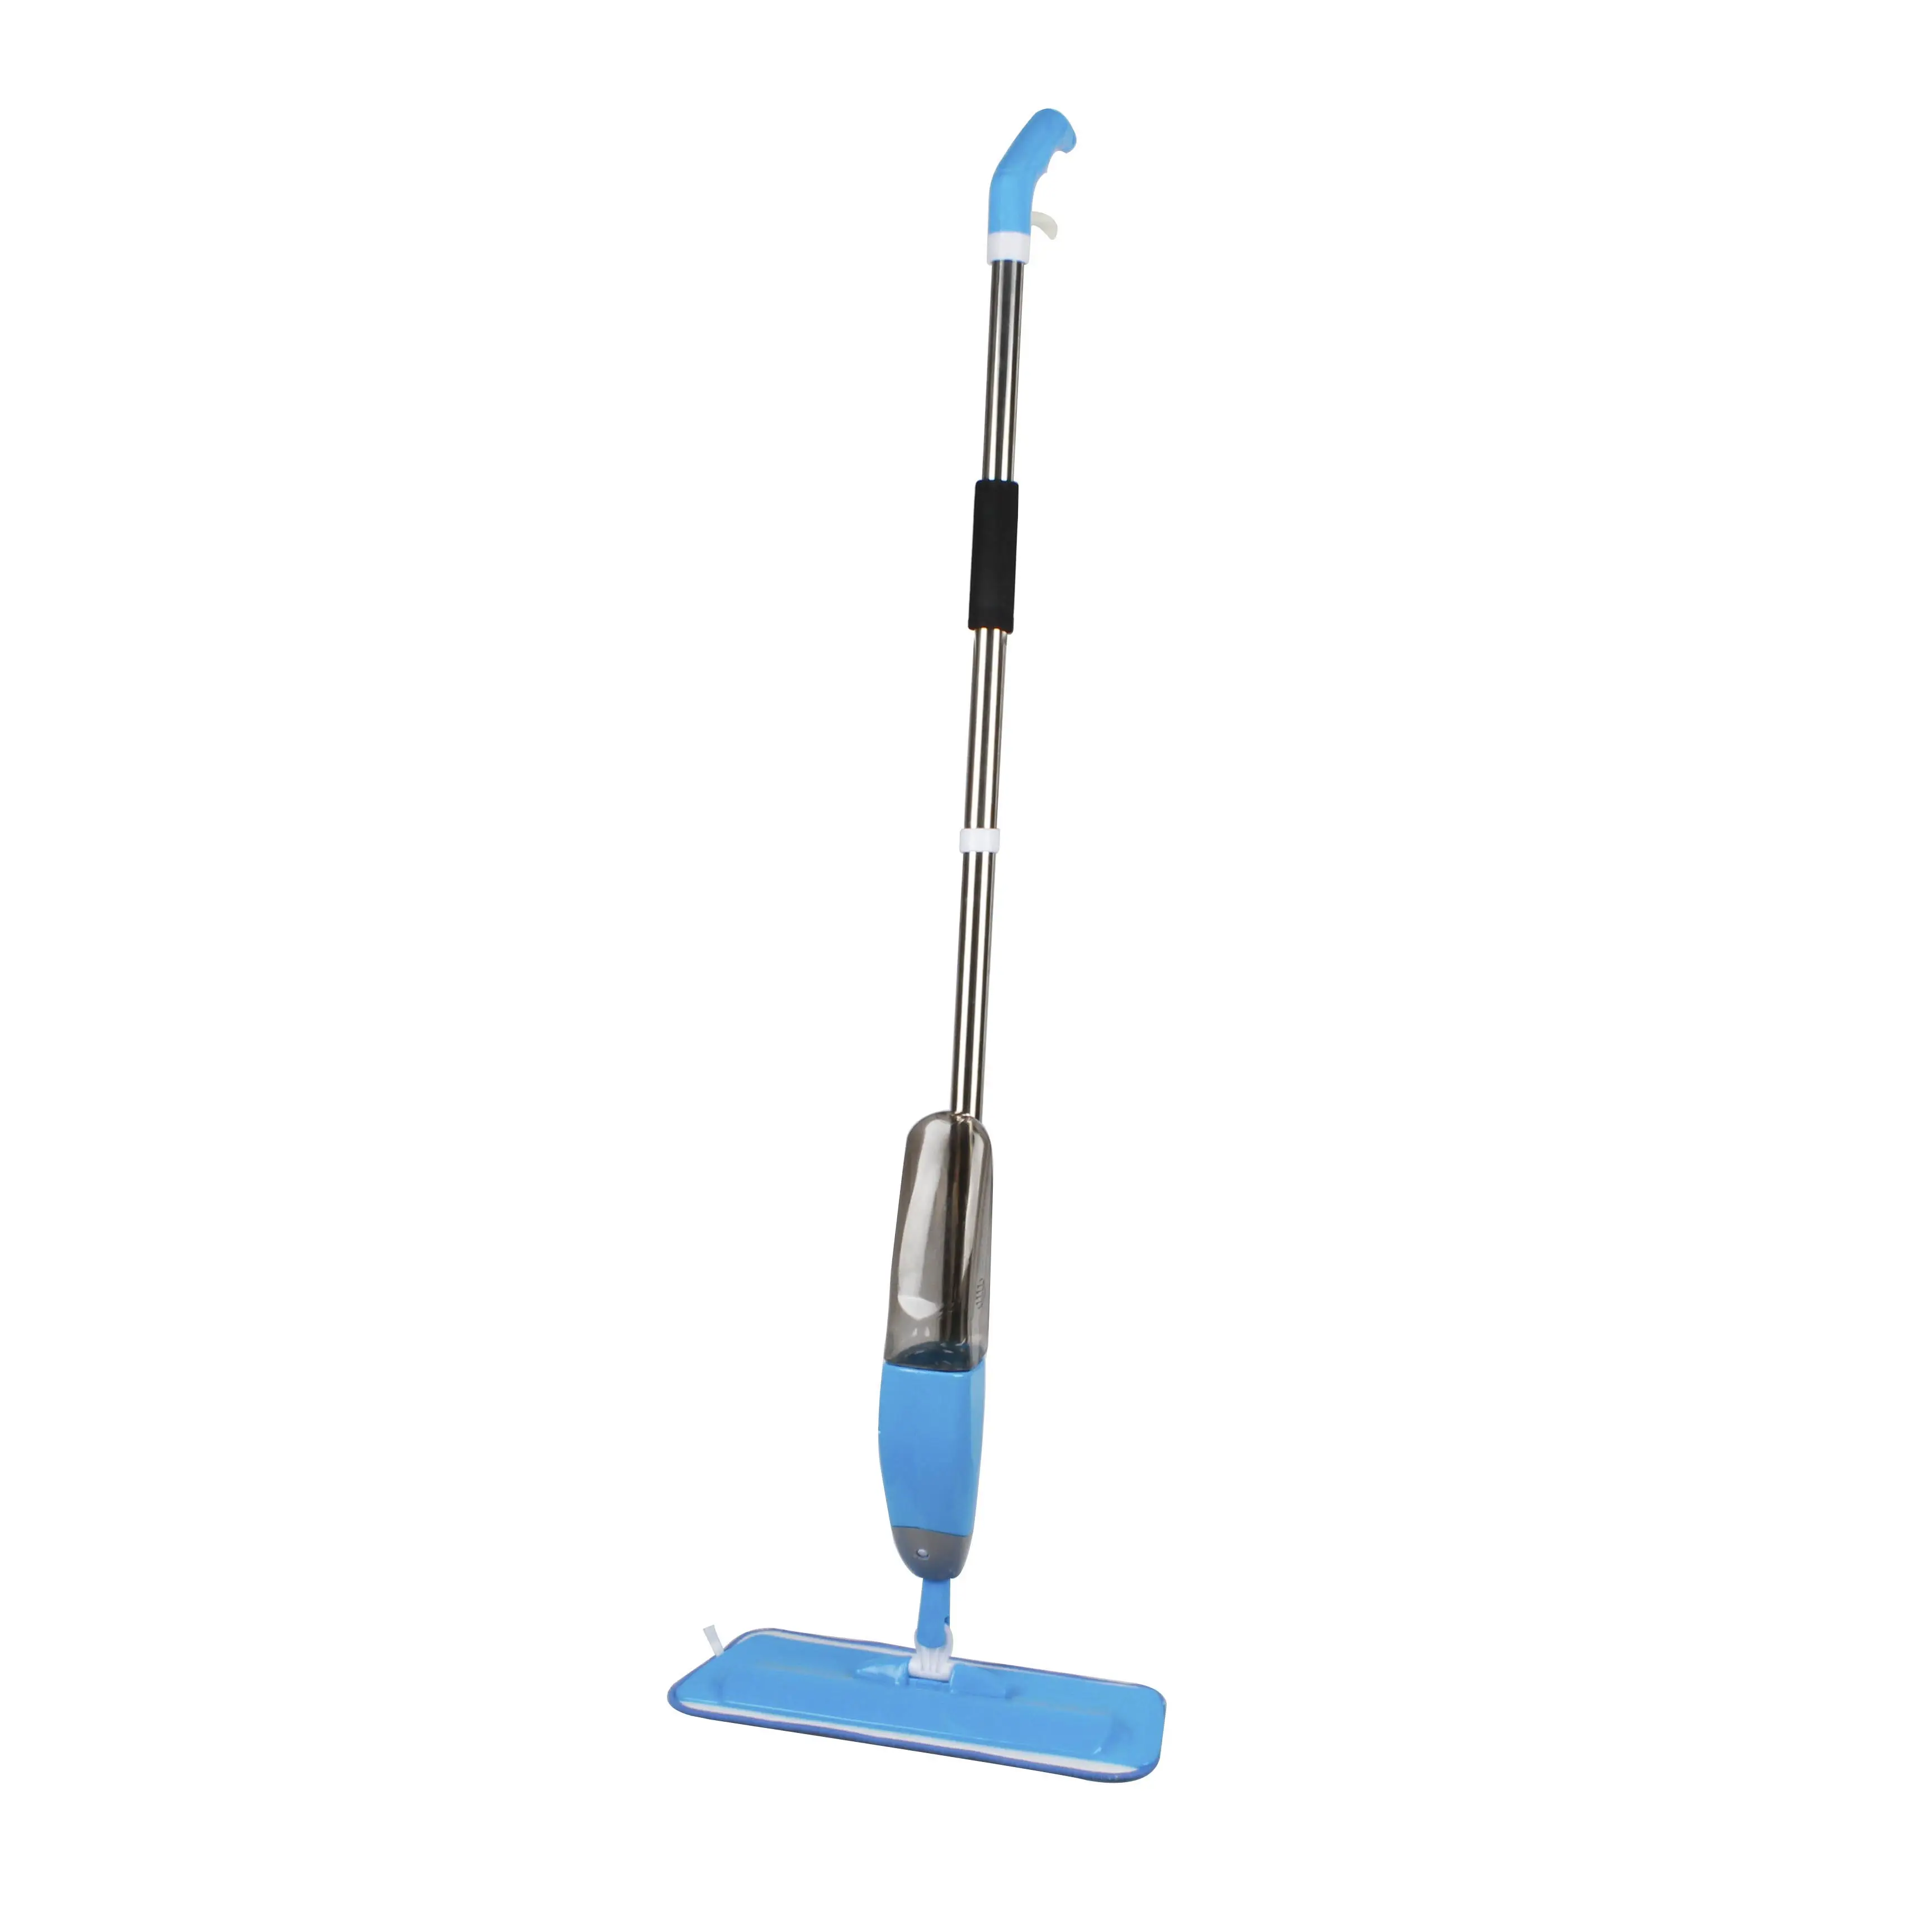 Microfiber Spray Mop for Hardwood Floor Cleaning Wet and Dry with 410ml 360 Degree Spin Water Tank Sprayer